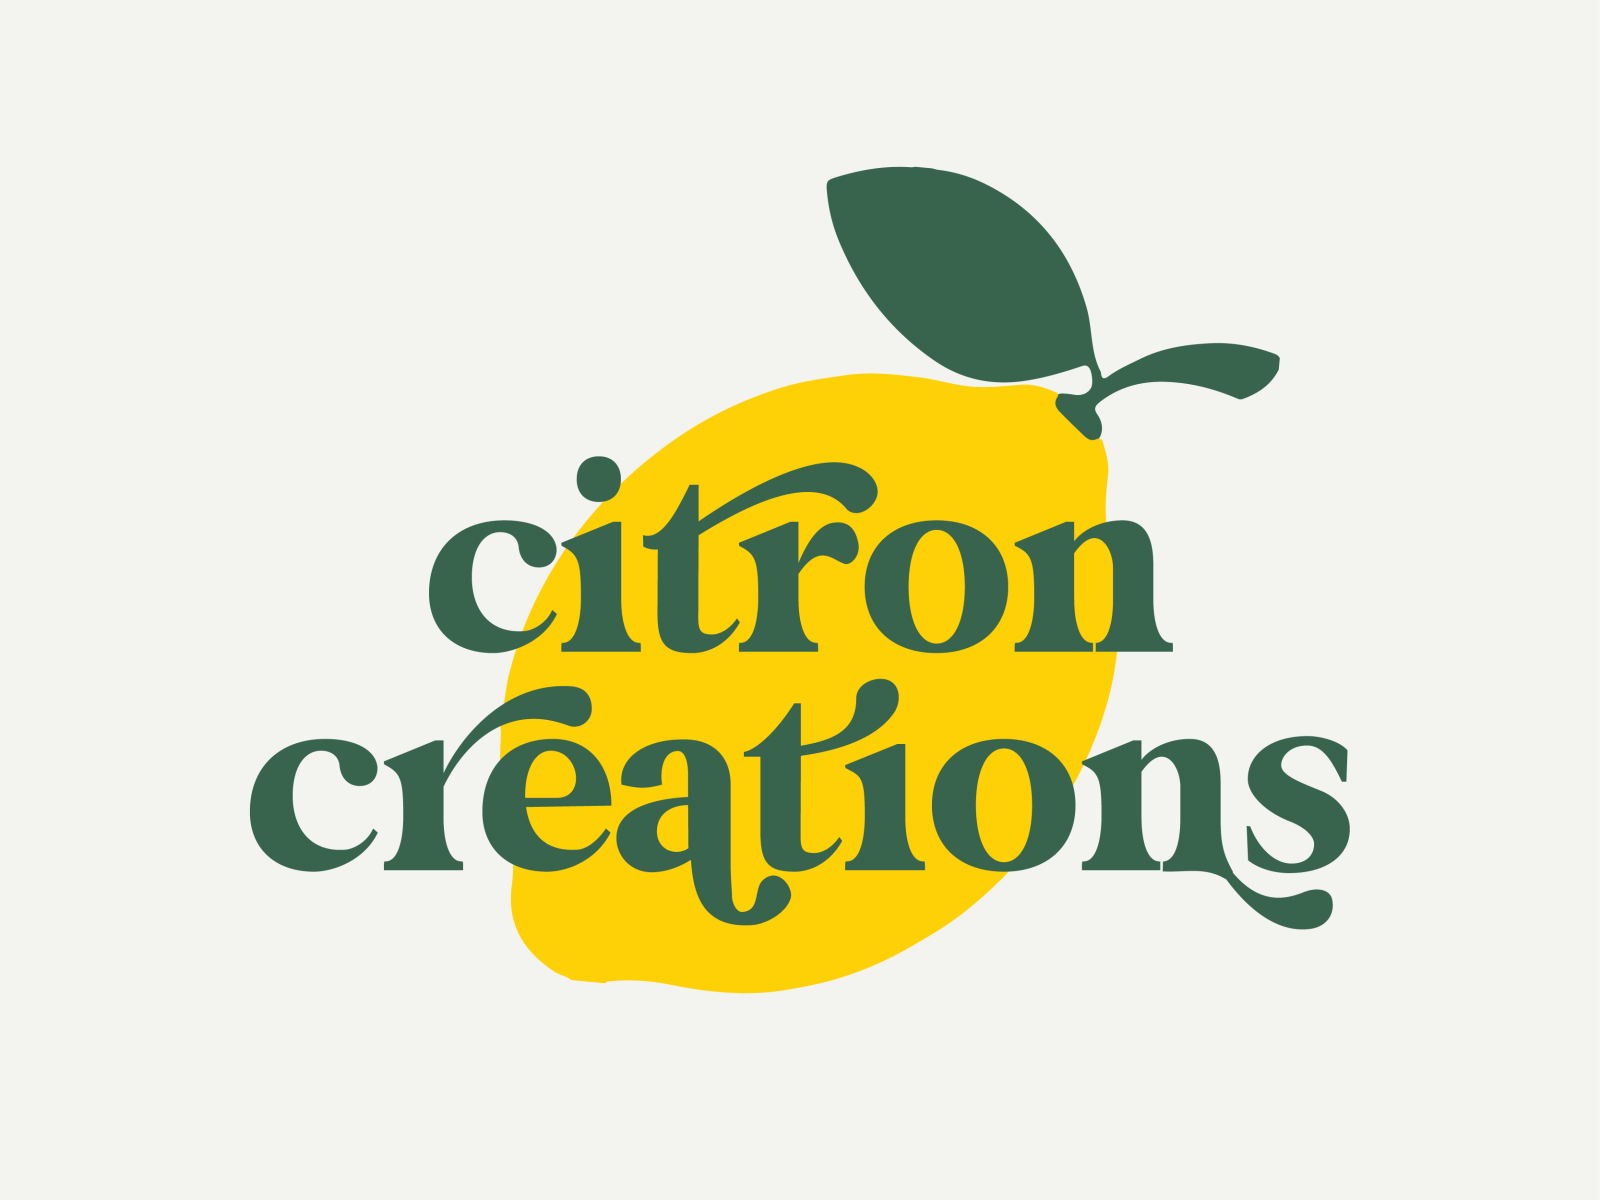 Citron Creations by celia felter on Dribbble